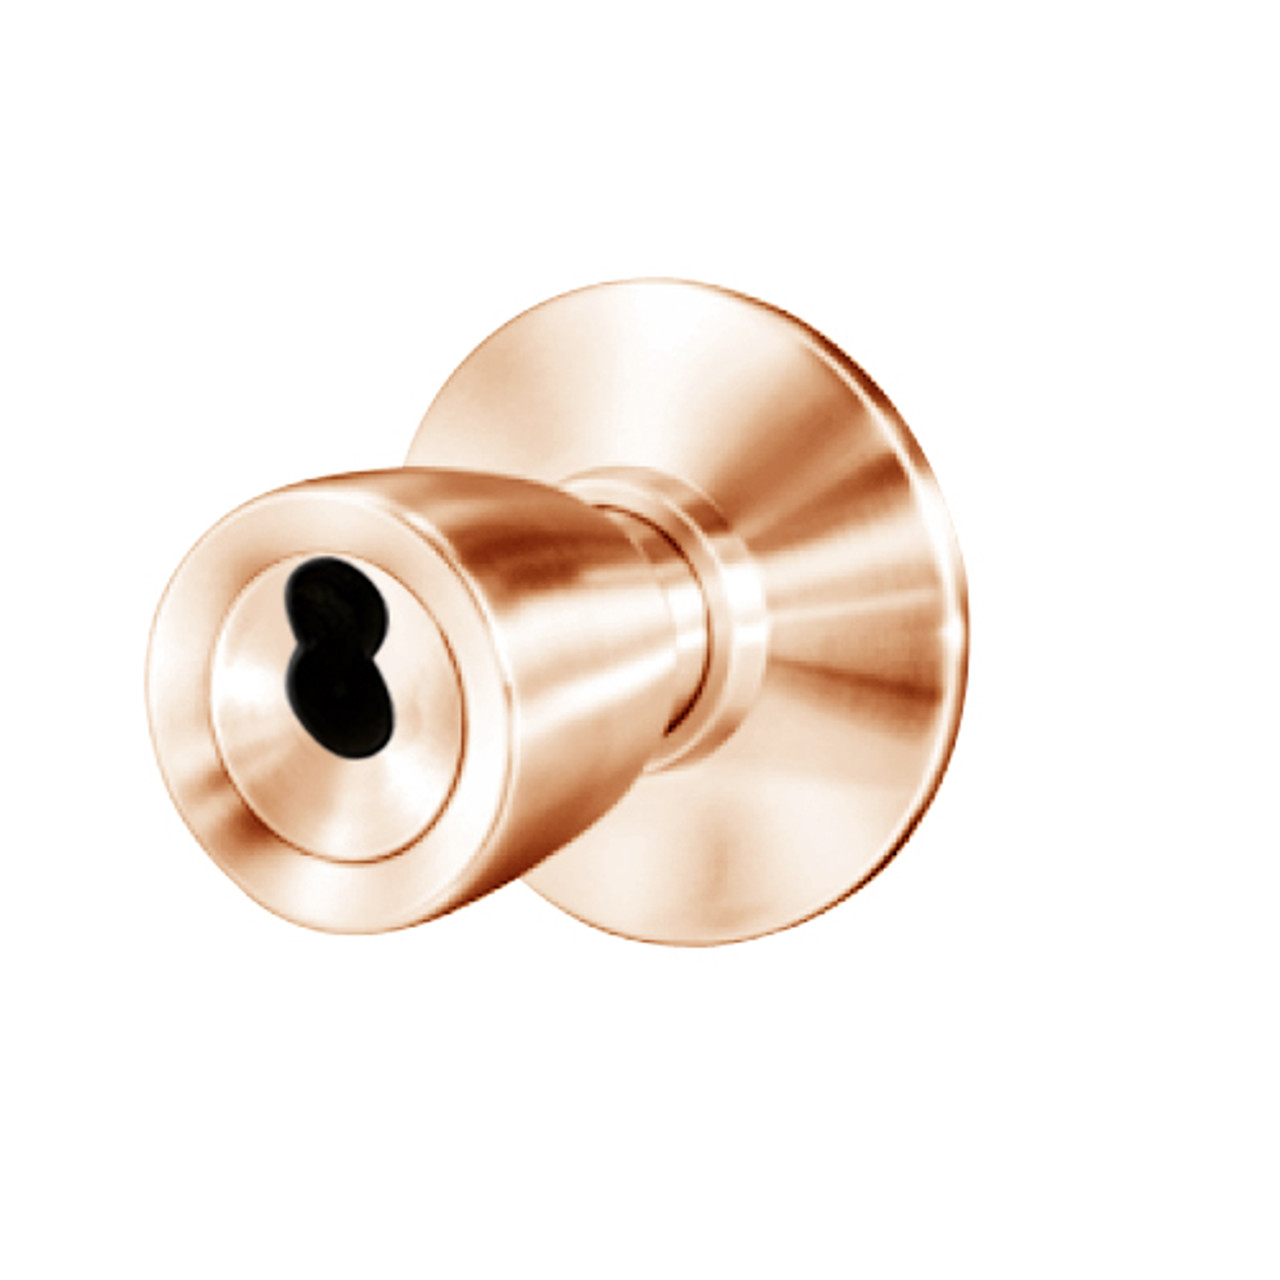 8K37YR6DS3611 Best 8K Series Exit Heavy Duty Cylindrical Knob Locks with Tulip Style in Bright Bronze